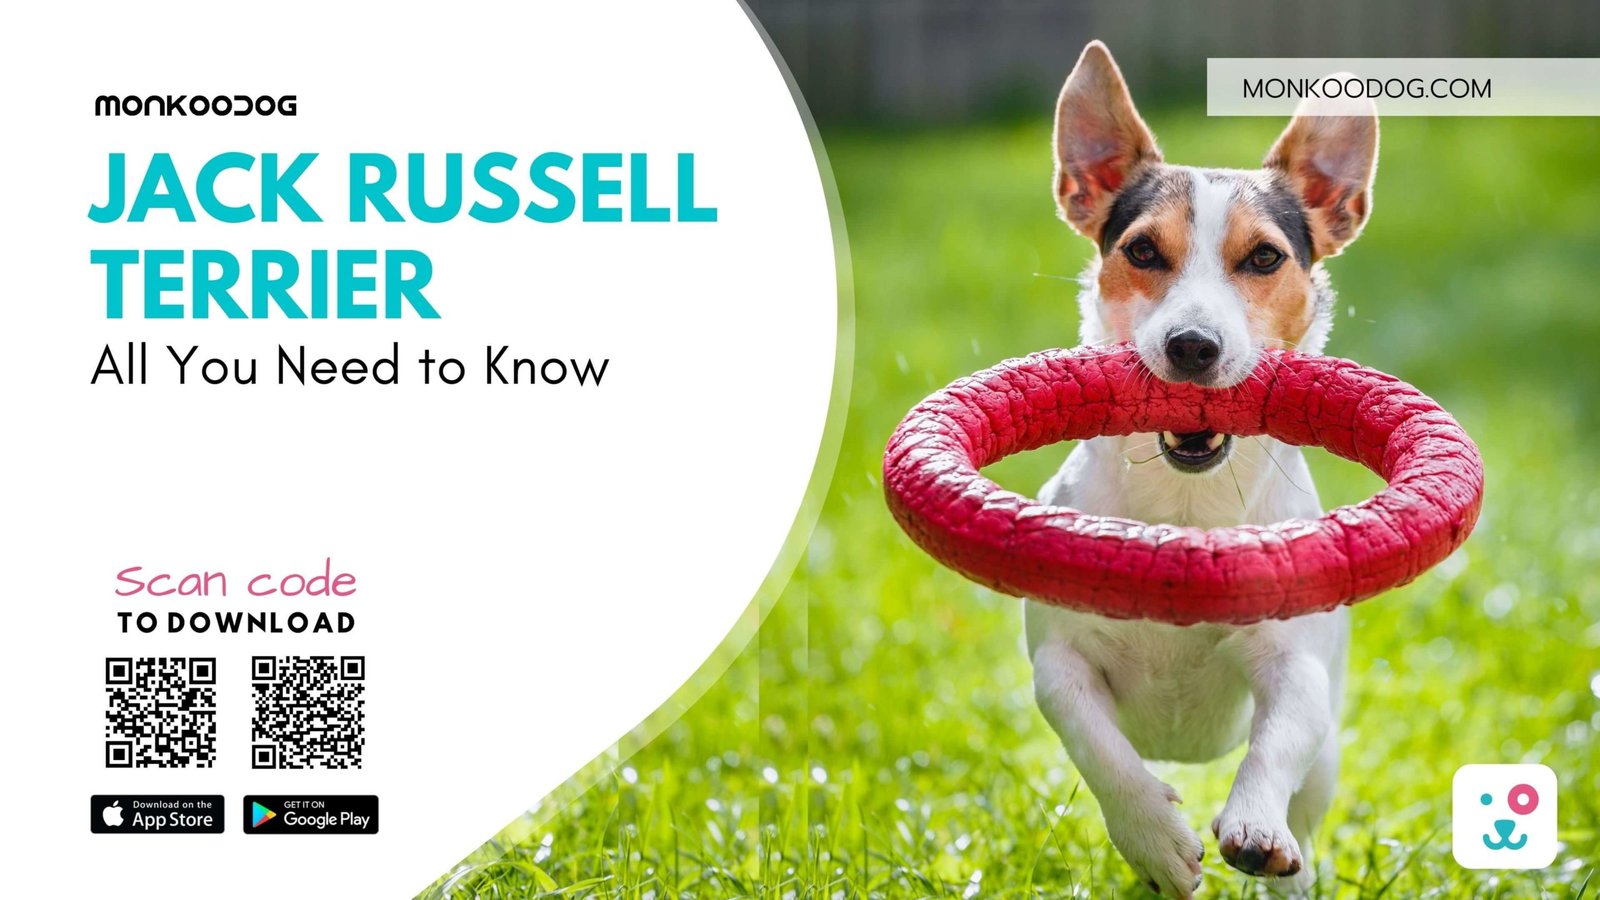 Jack Russell Terrier All You Need to Know